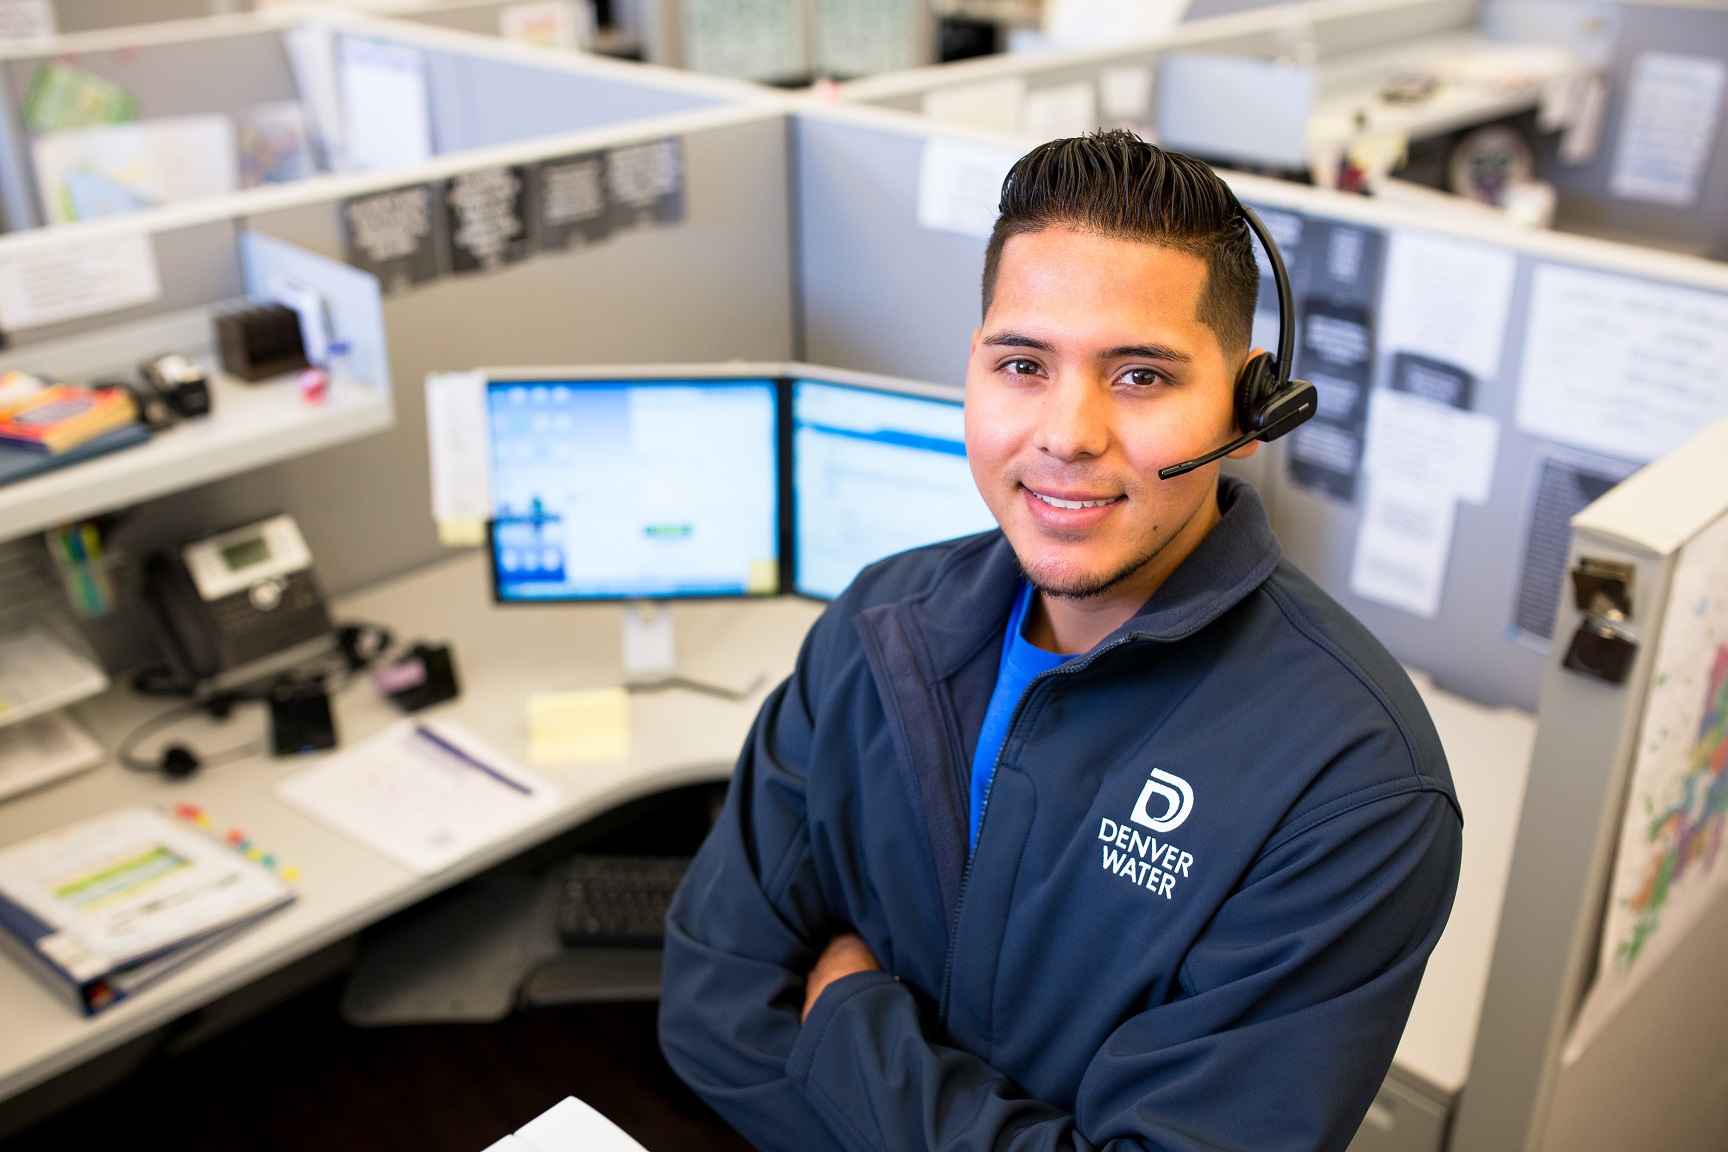 Valero first developed his passion for working at Denver Water when he was hired to work in Customer Care.